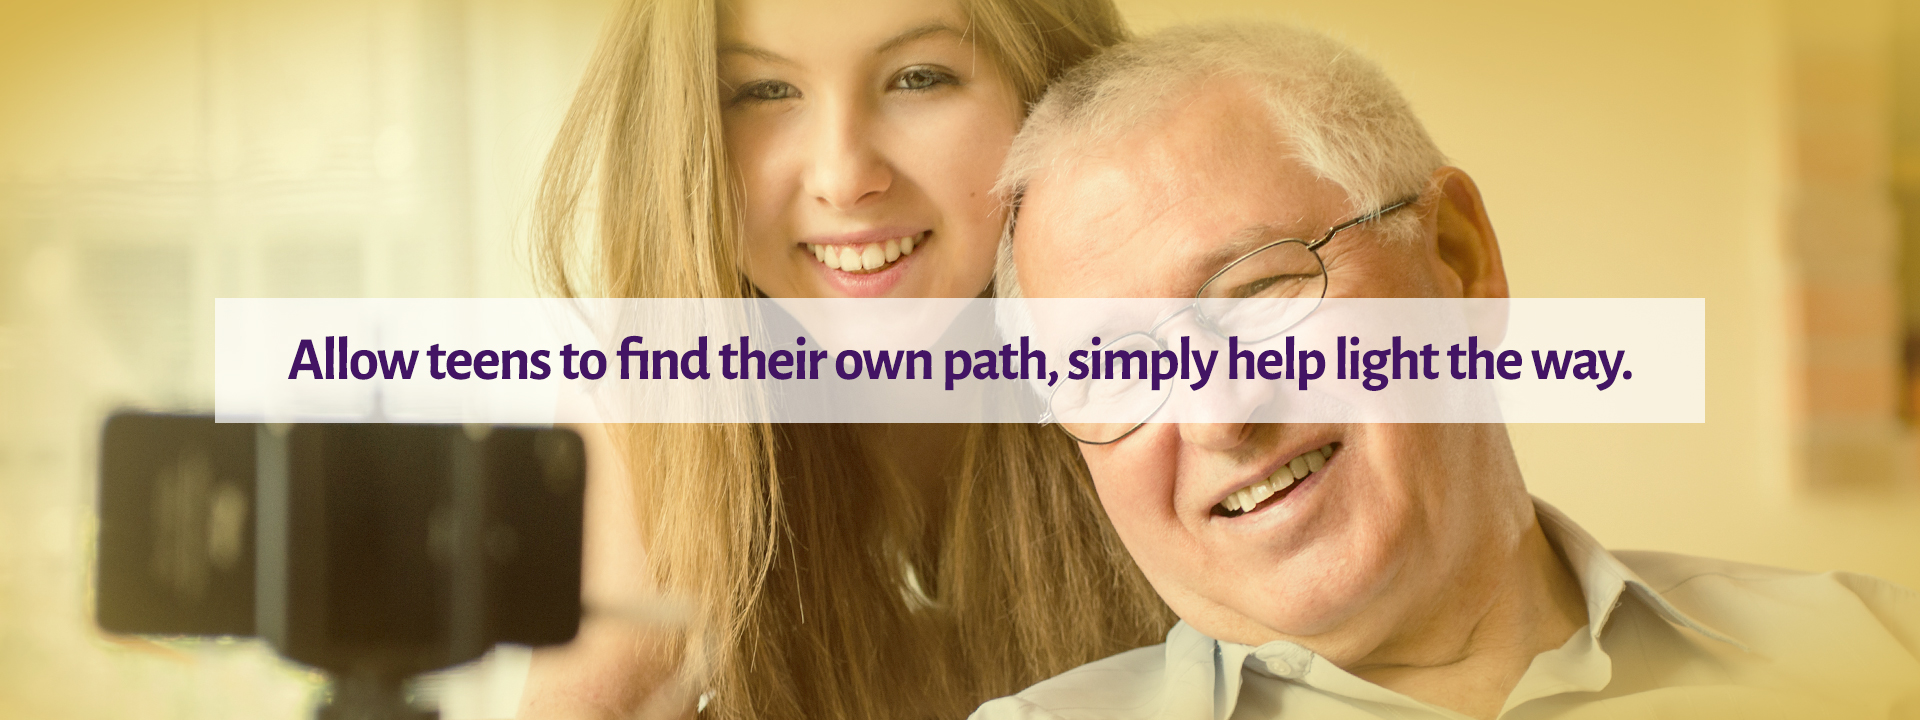 Allow teens to find their own path, simply help light the way.